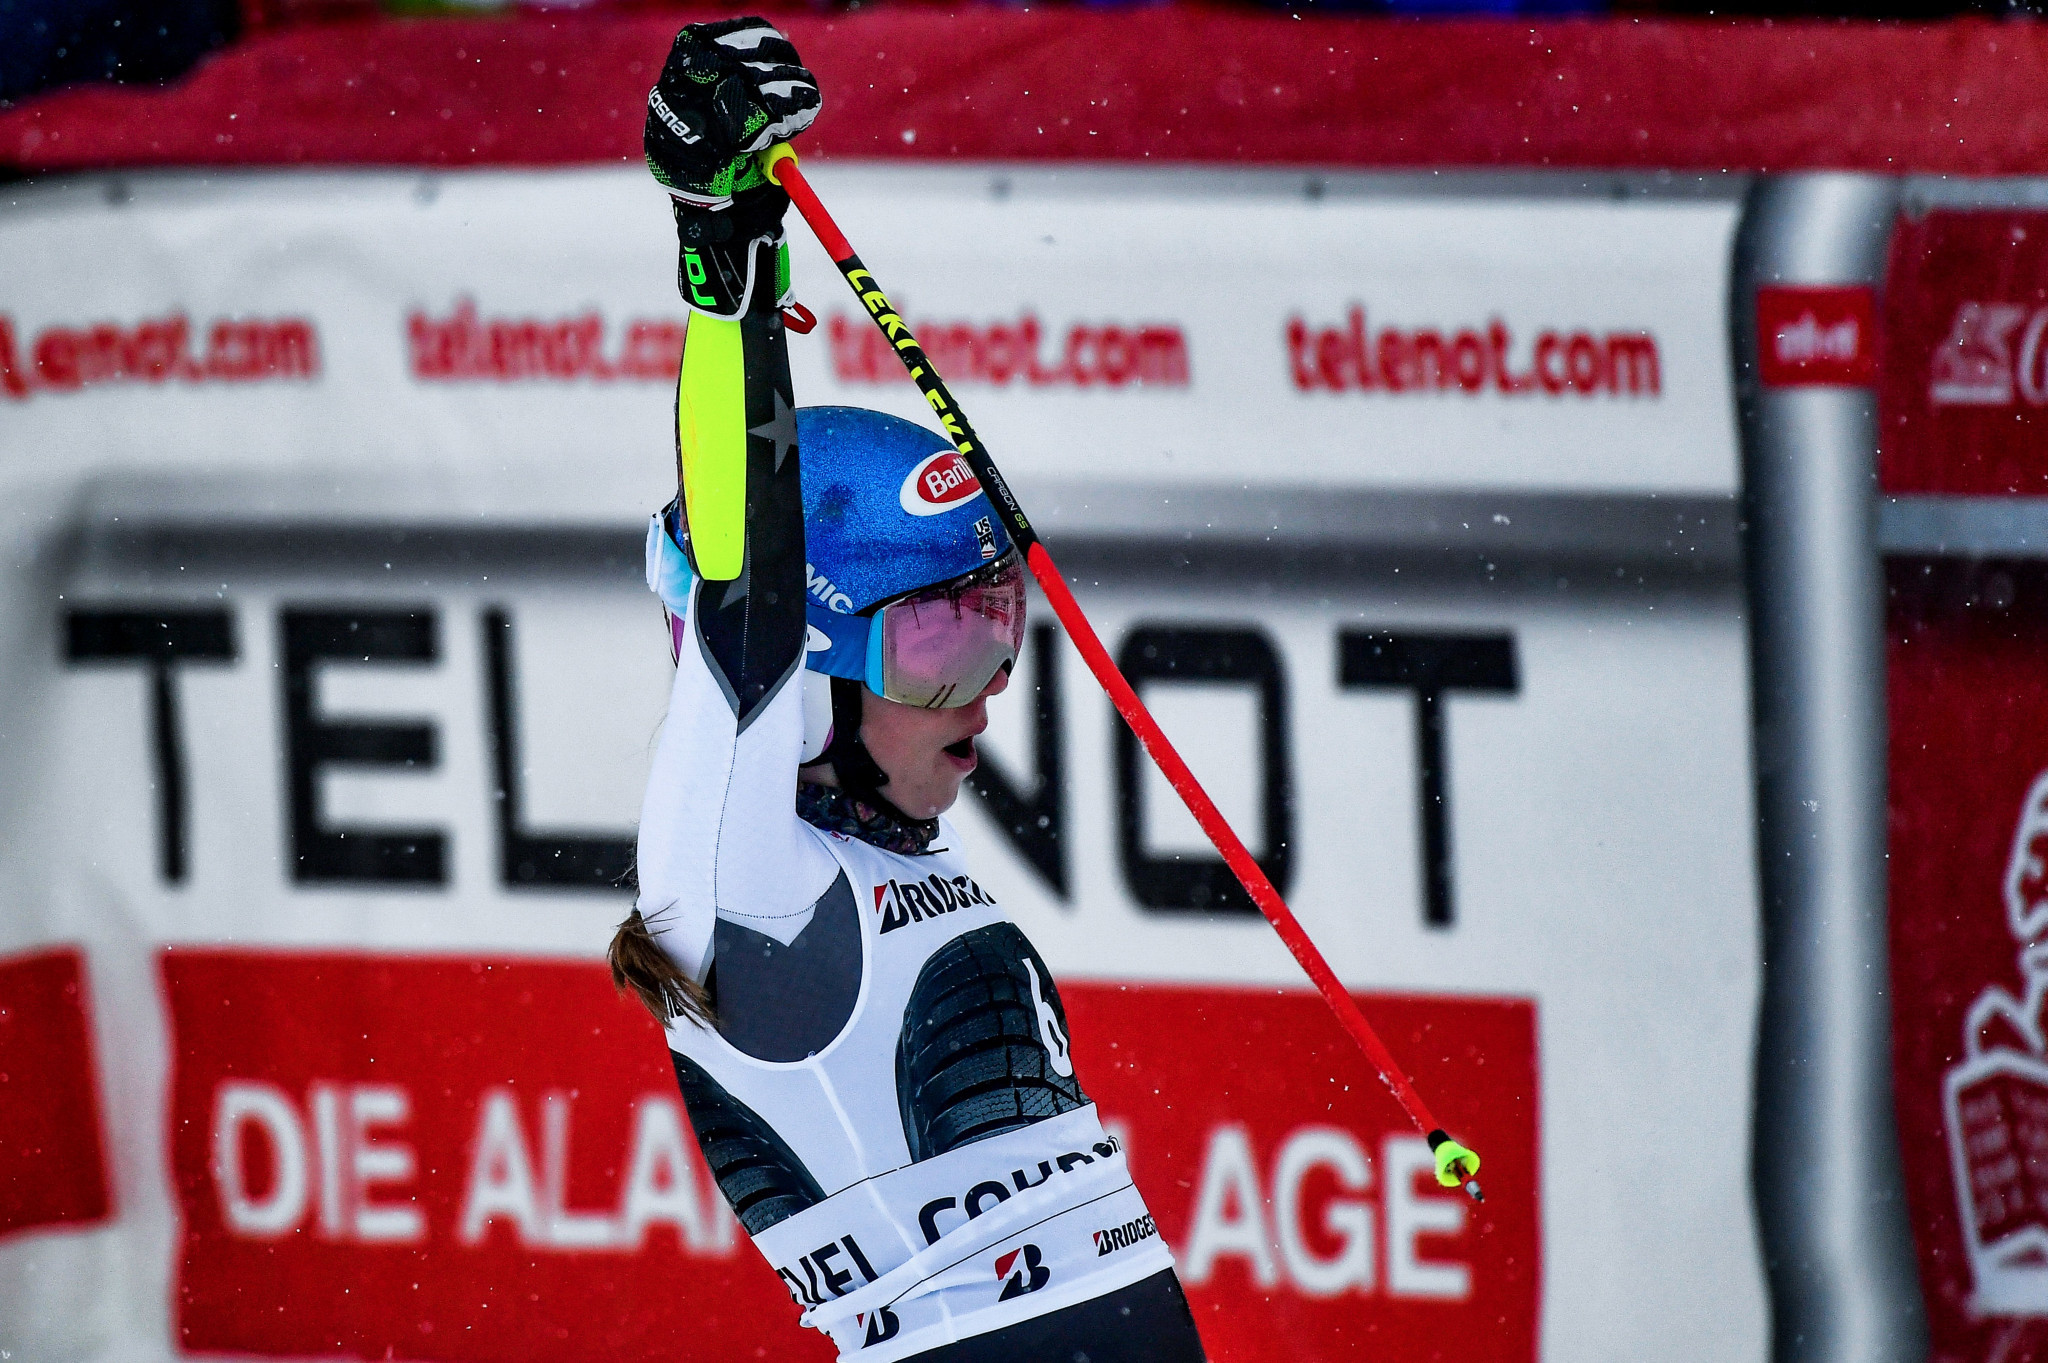 Shiffrin wins again in Courchevel to extend overall Alpine World Cup lead